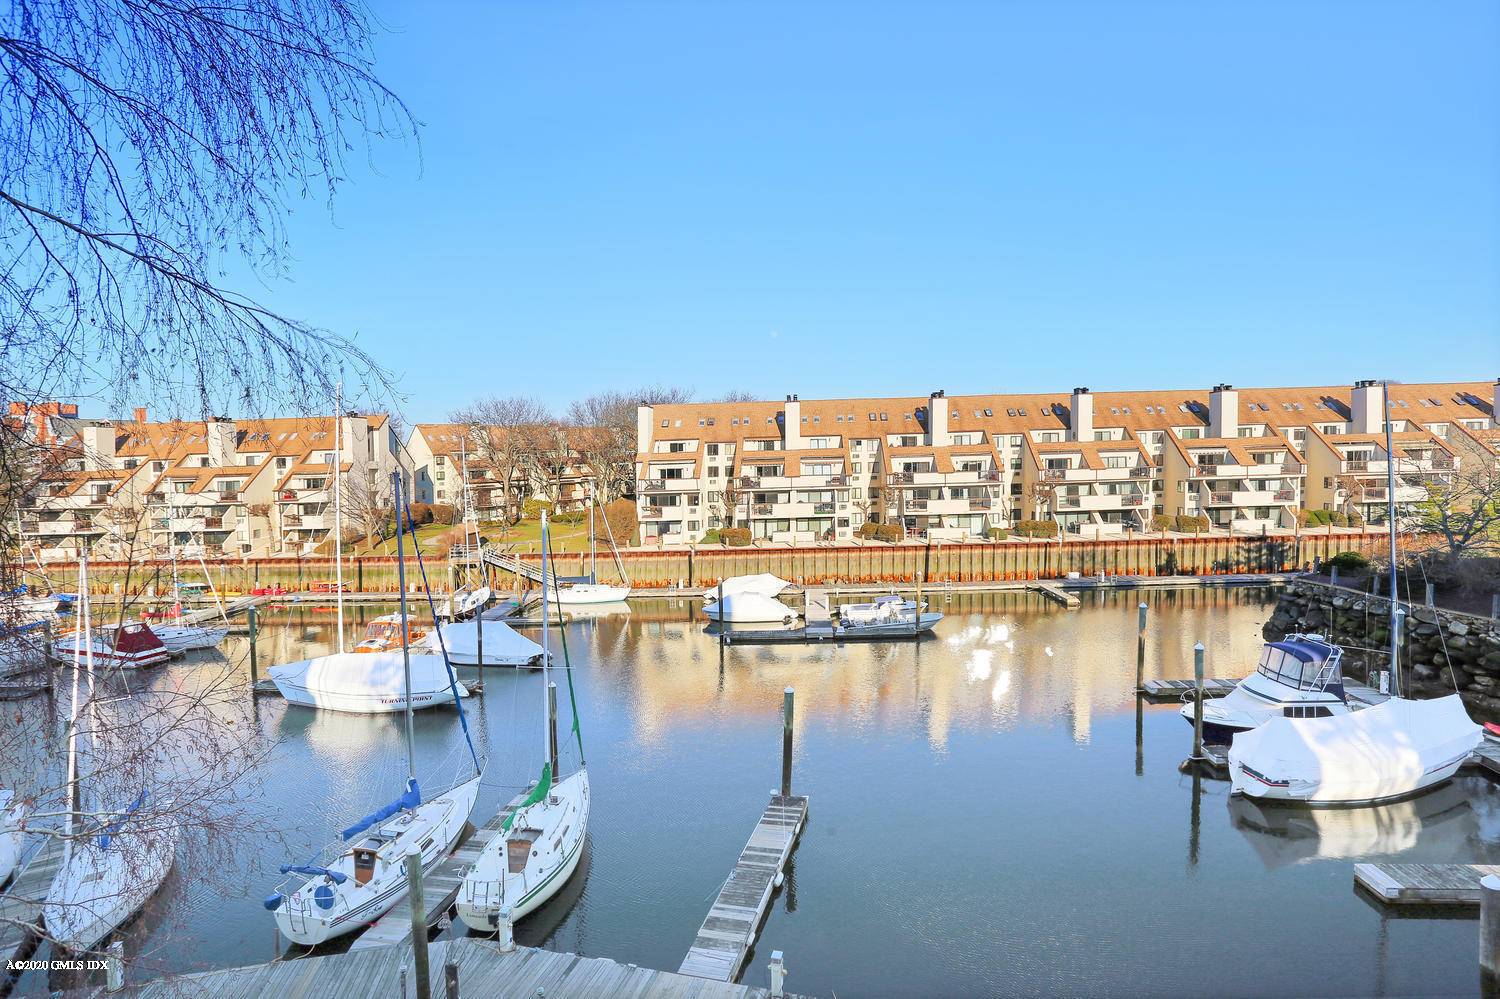 It's had to find a more calming, sophisticated community as Palmer Landing on the Stamford Waterfront.